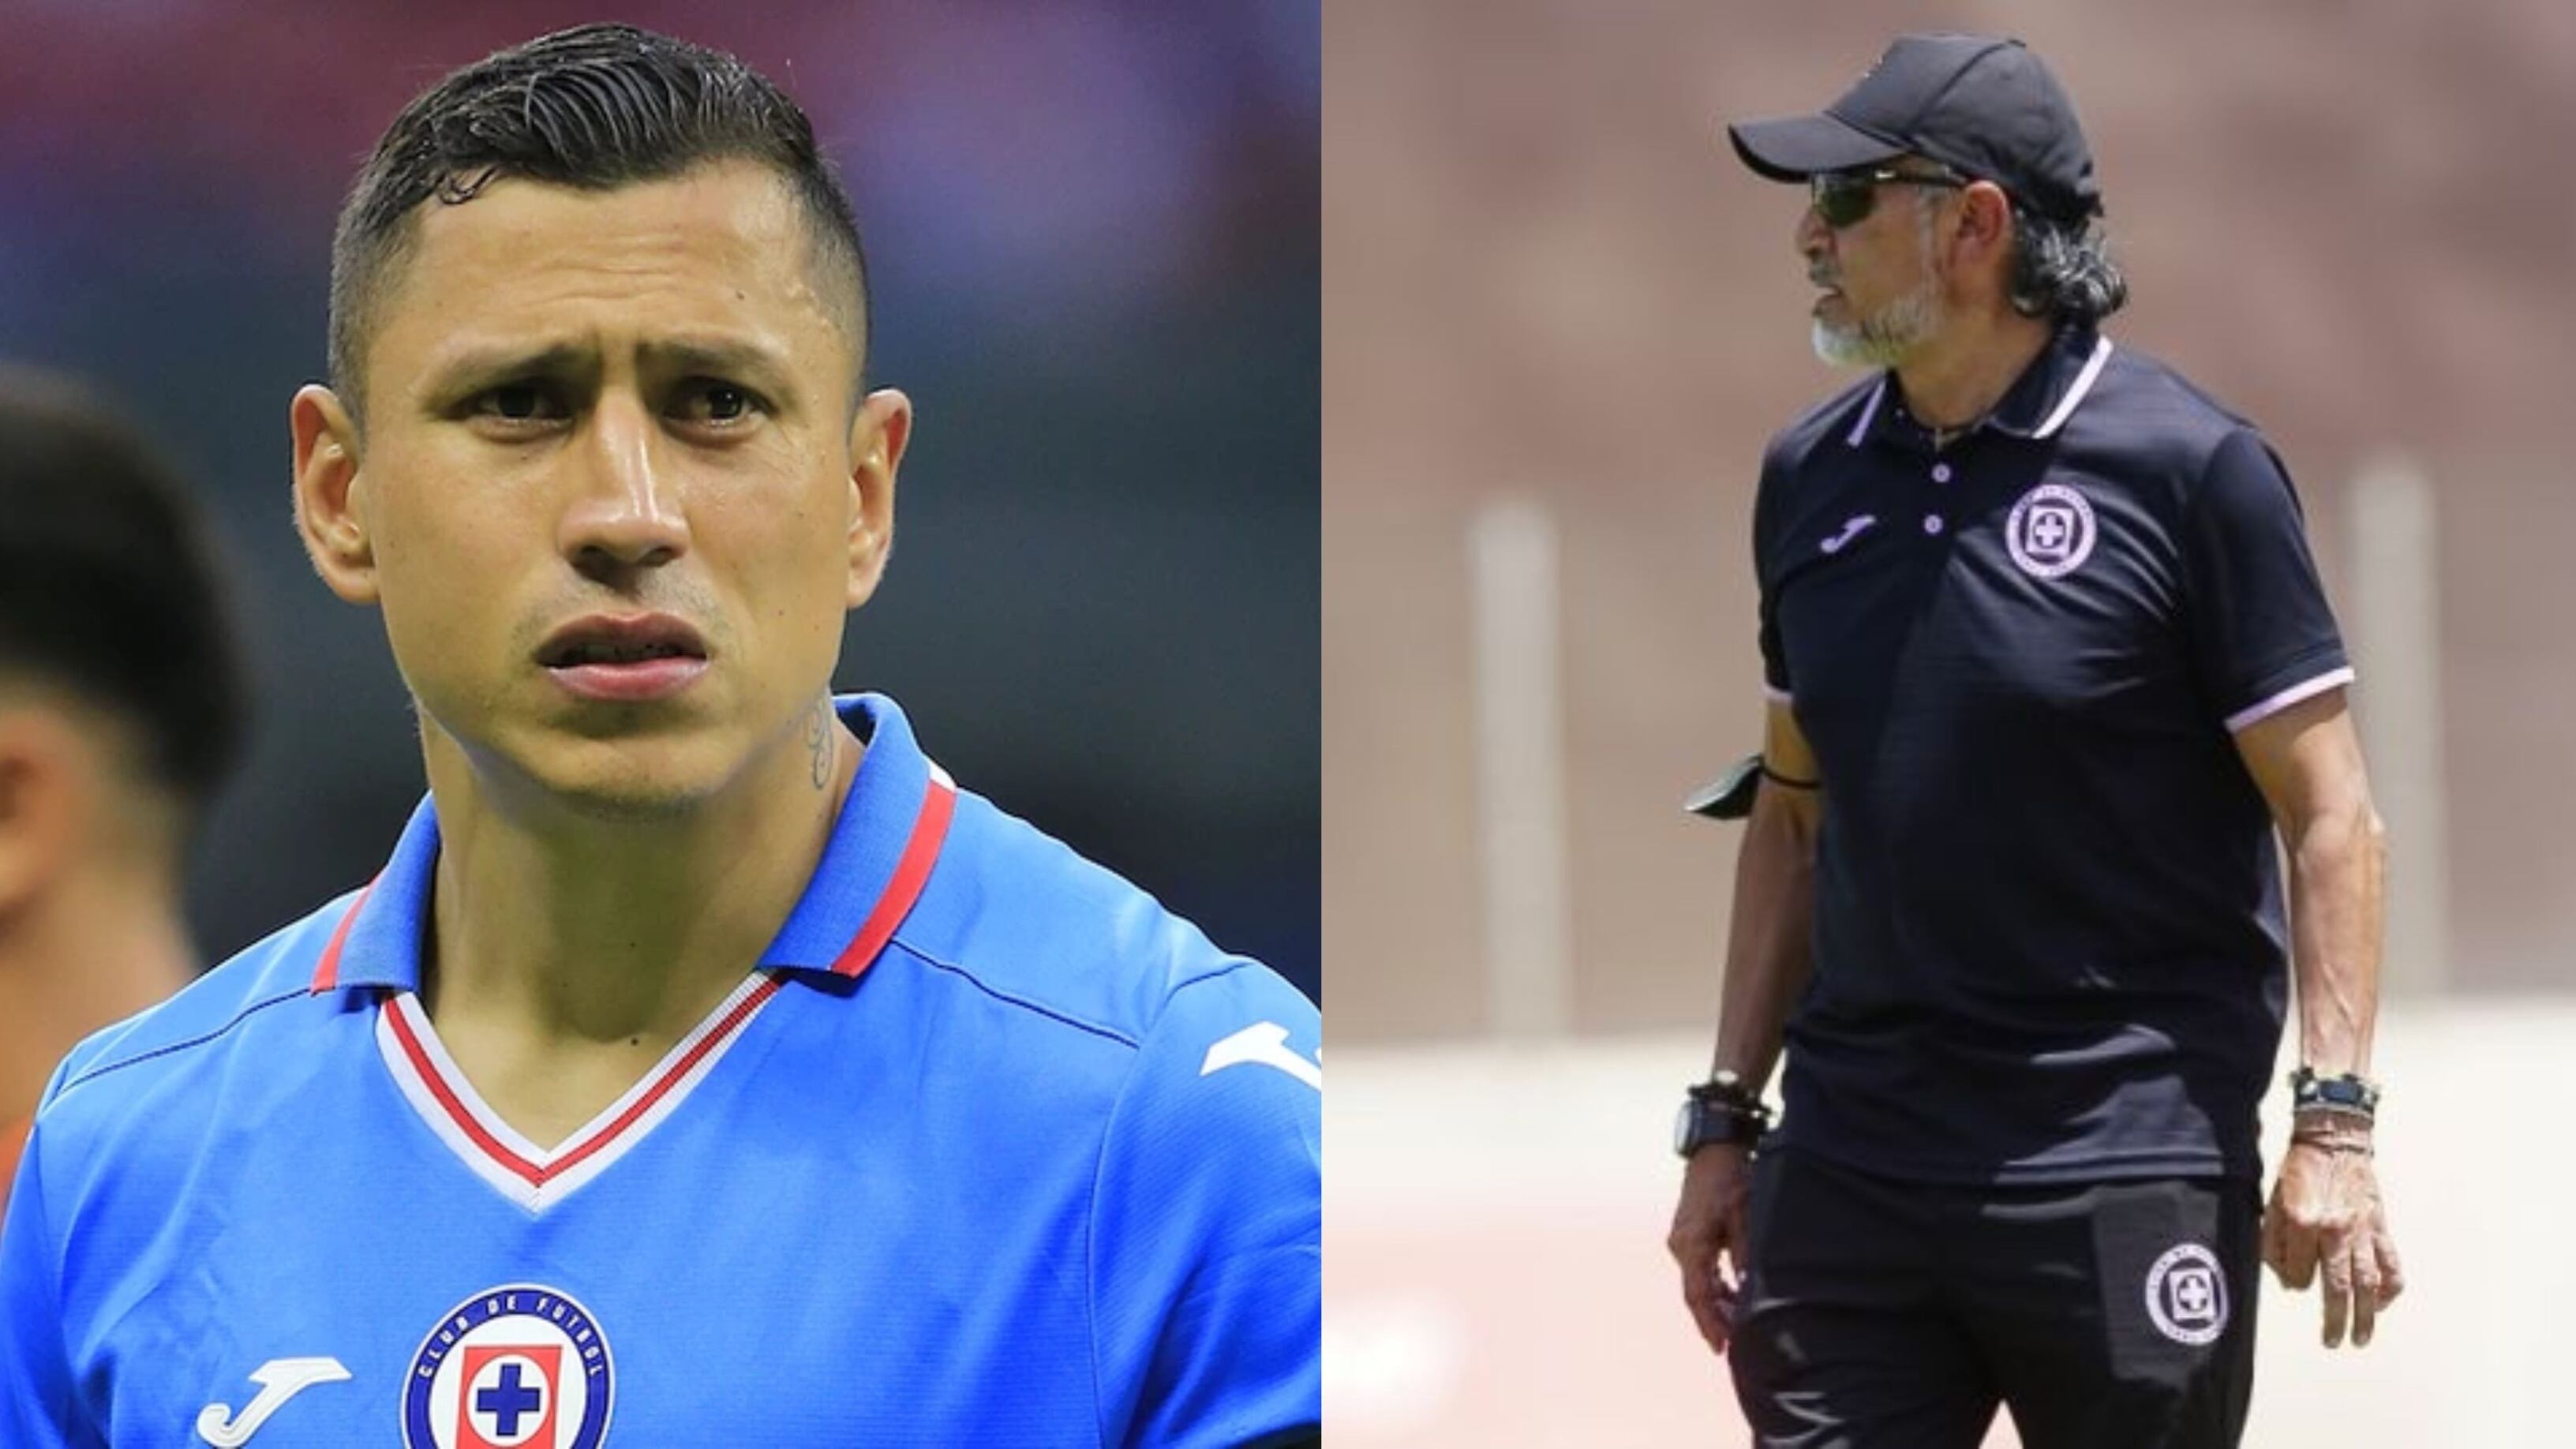 Gutierrez's changes at Cruz Azul, Corona in the starting lineup and what he decides about Cata